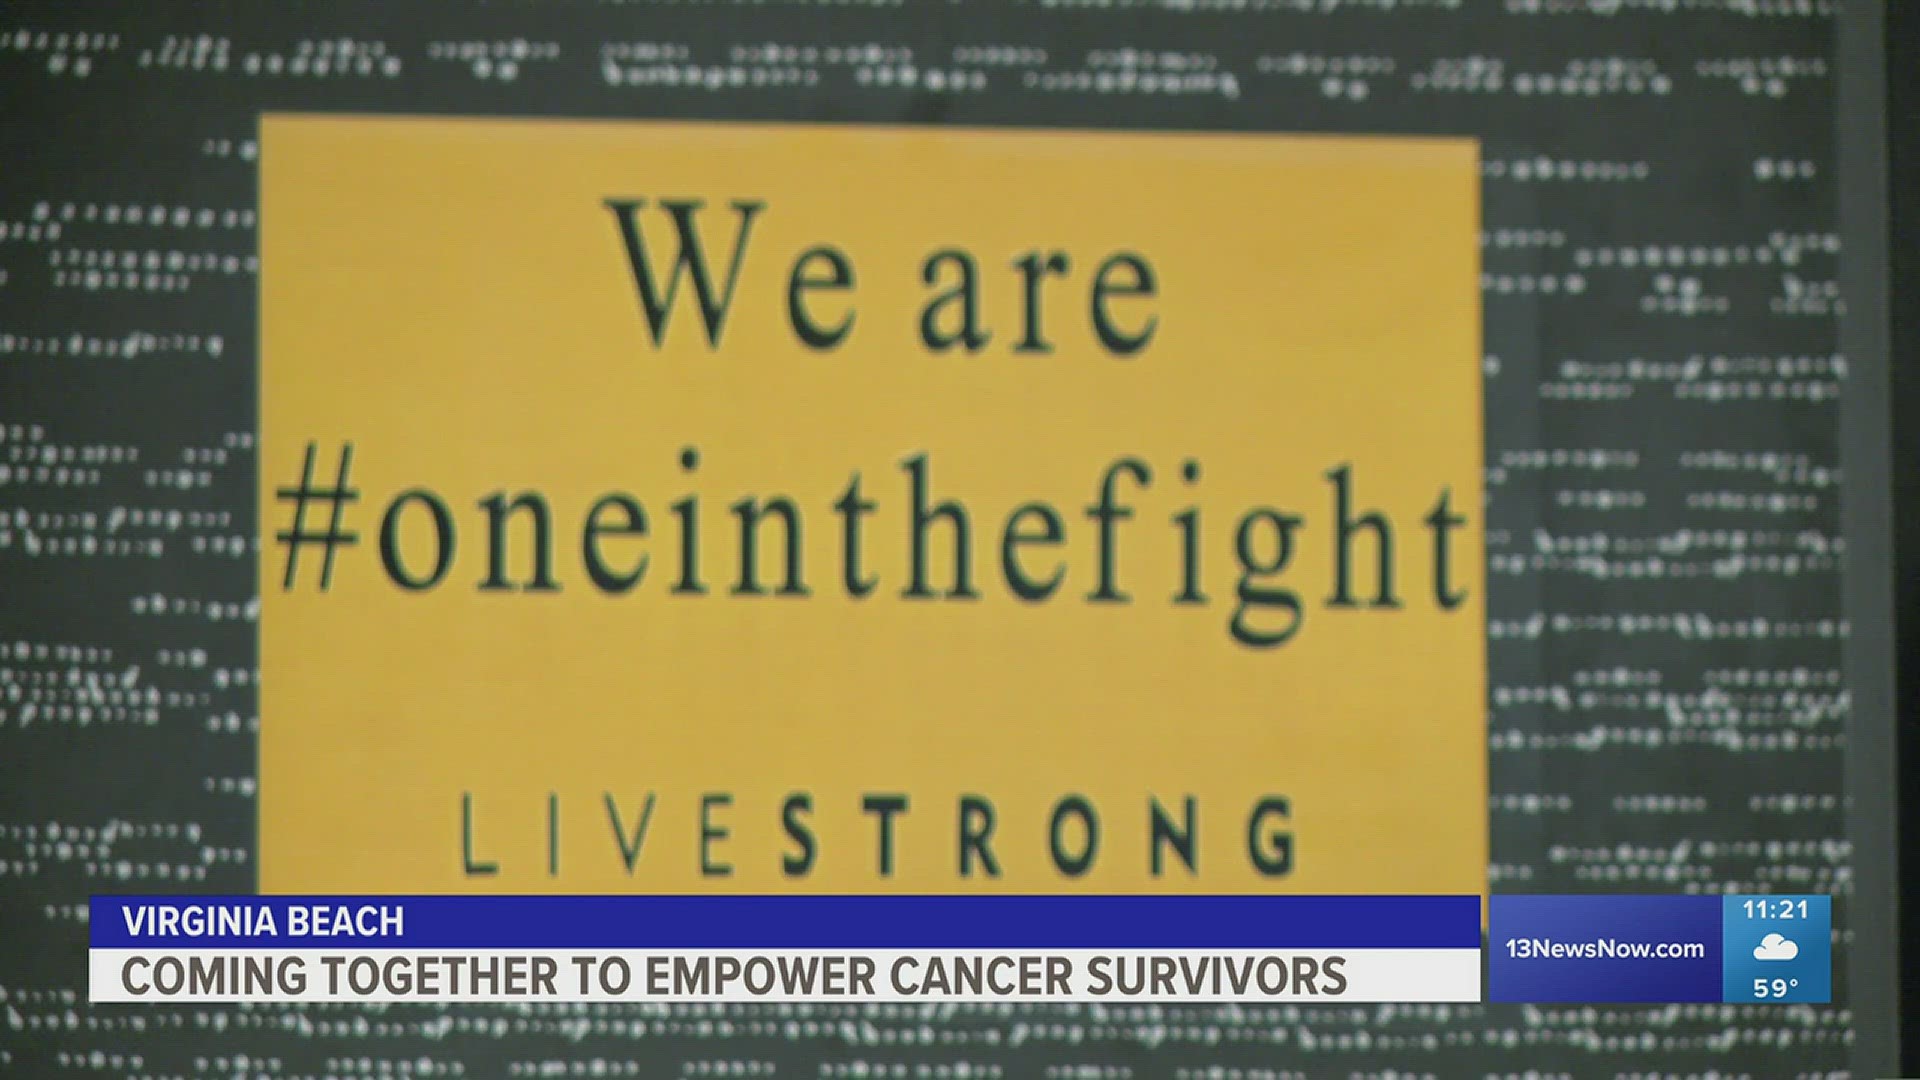 The 6th annual "Triple B" Live Strong Fundraiser took place in Virginia Beach.